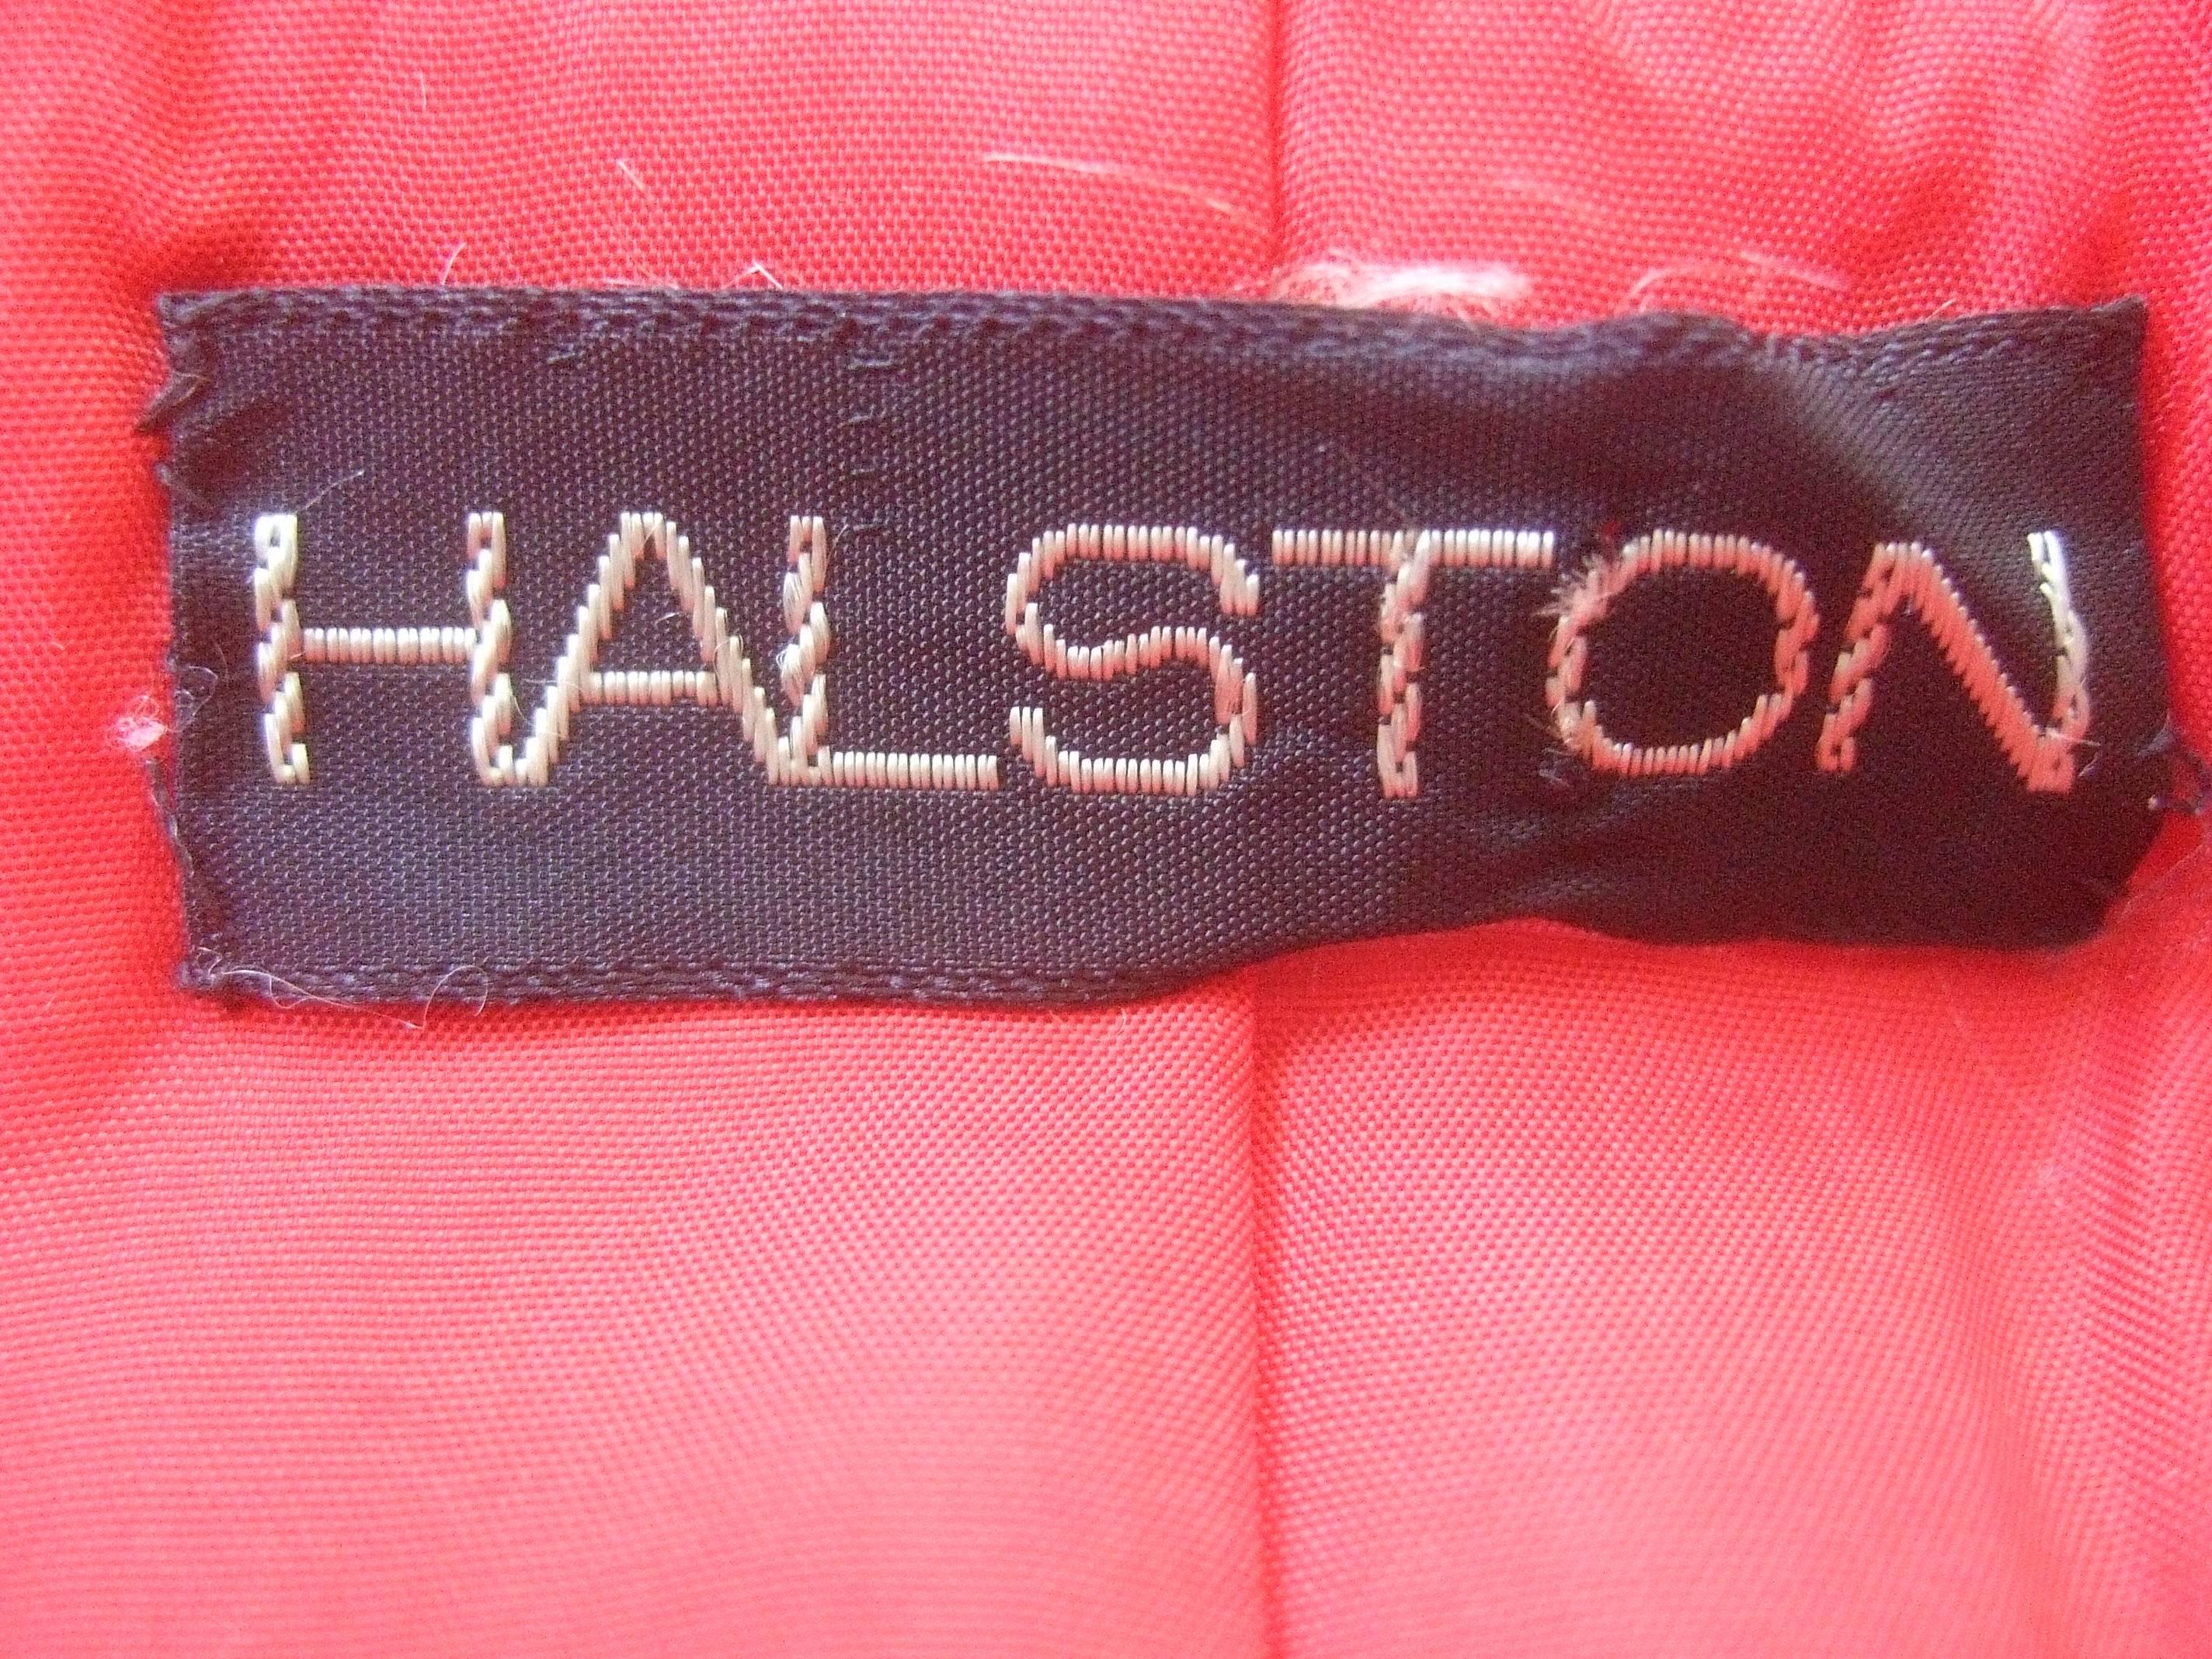 Cherry Red Halston Couture Belted Satin Jacket. 1970's. Studio 54. 3